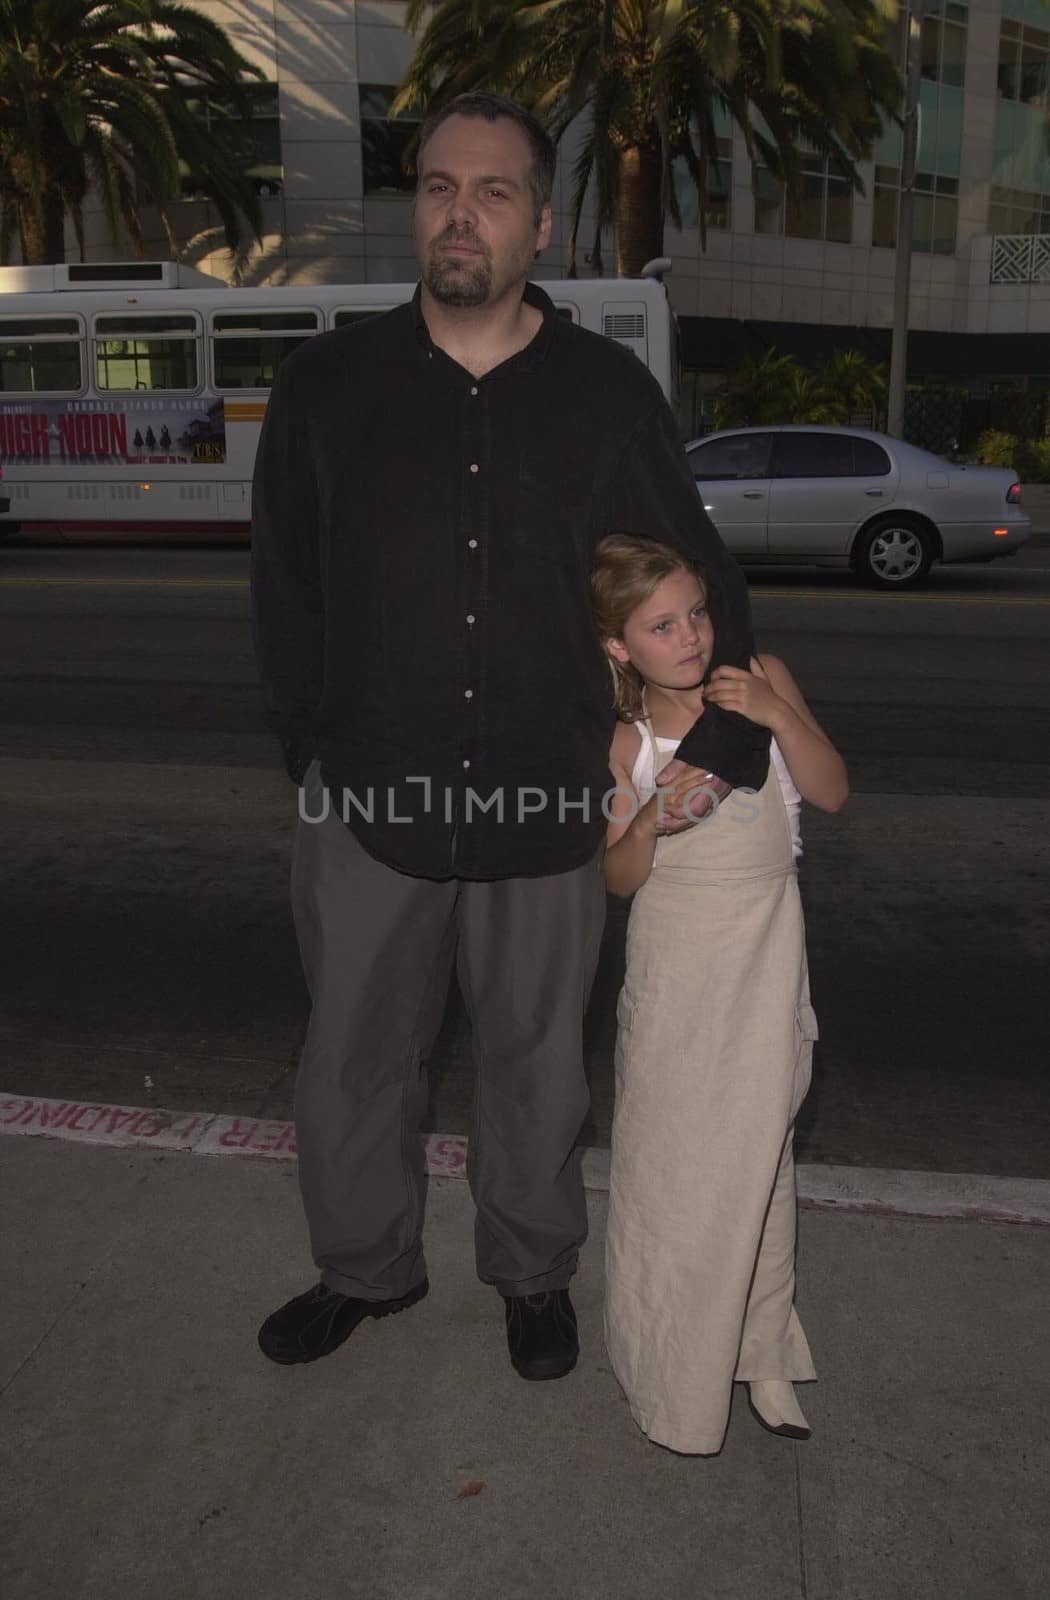 Vincent D'Onofrio at the premiere of "Steal This Movie" in Santa Monica. 08-15-00